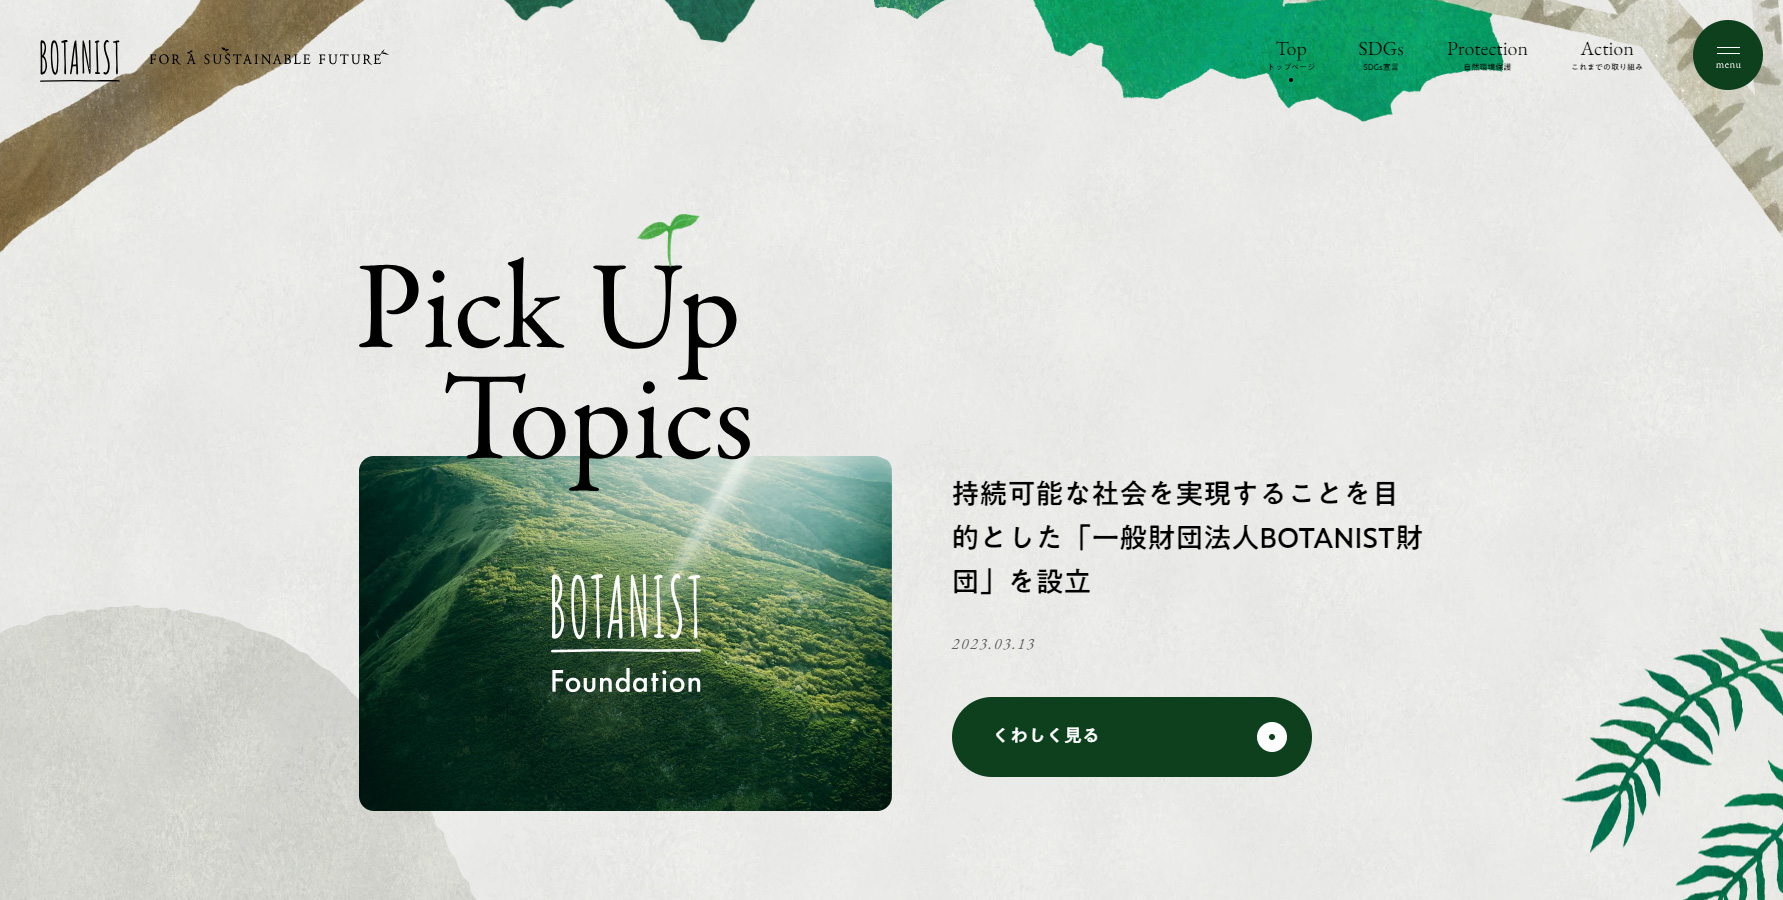 BOTANIST | FOR A SUSTAINABLE FUTURE - Website of the Day